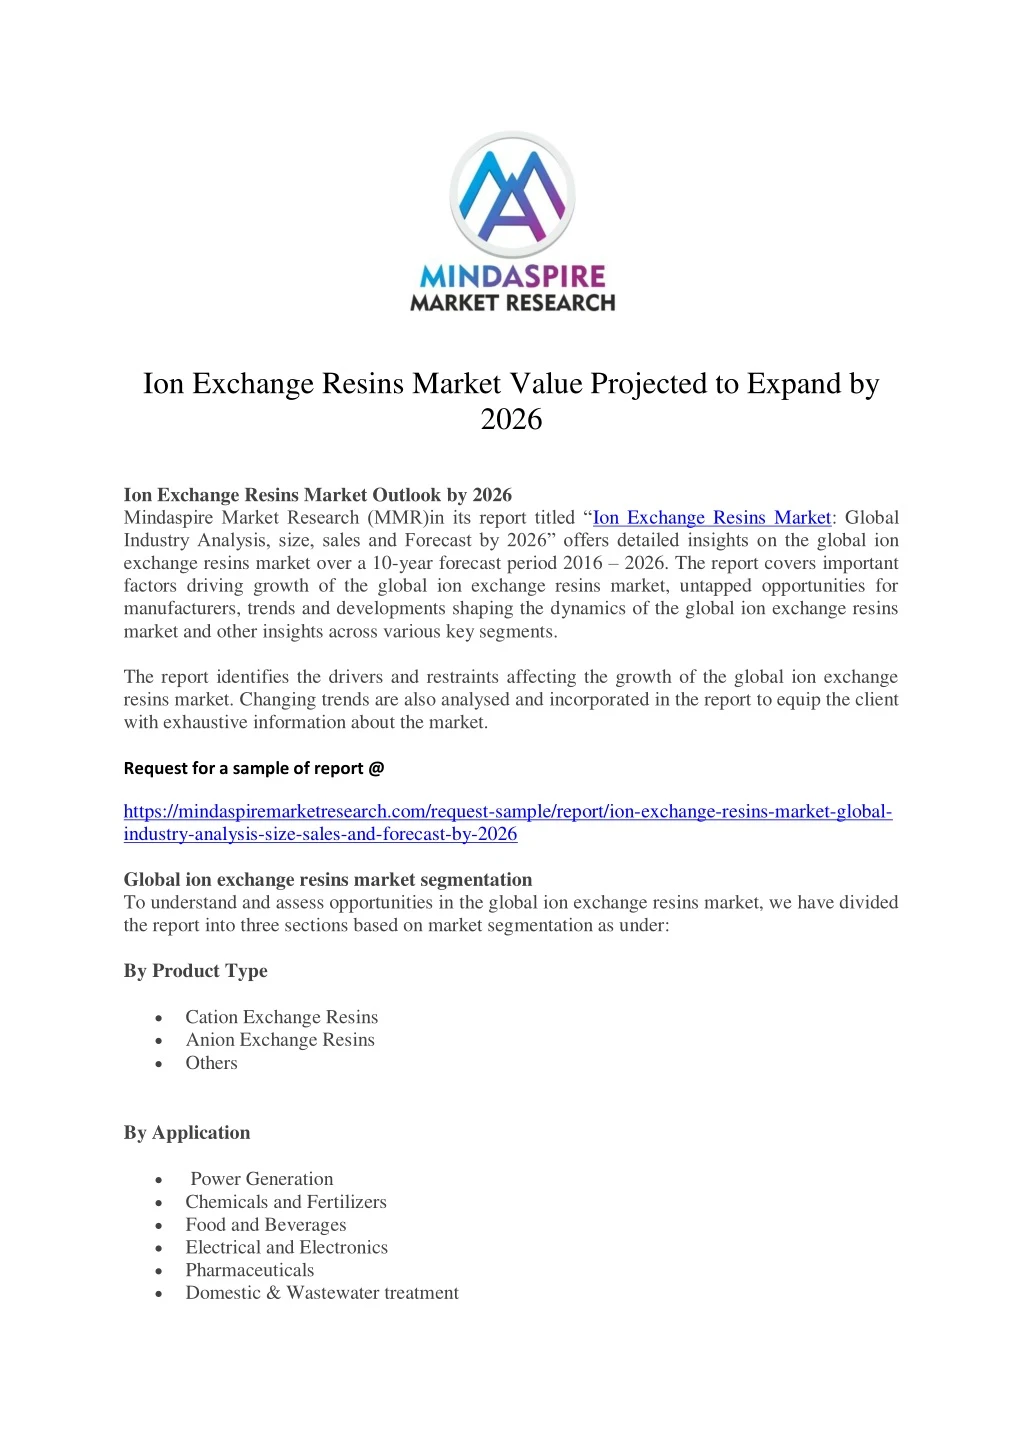 ion exchange resins market value projected